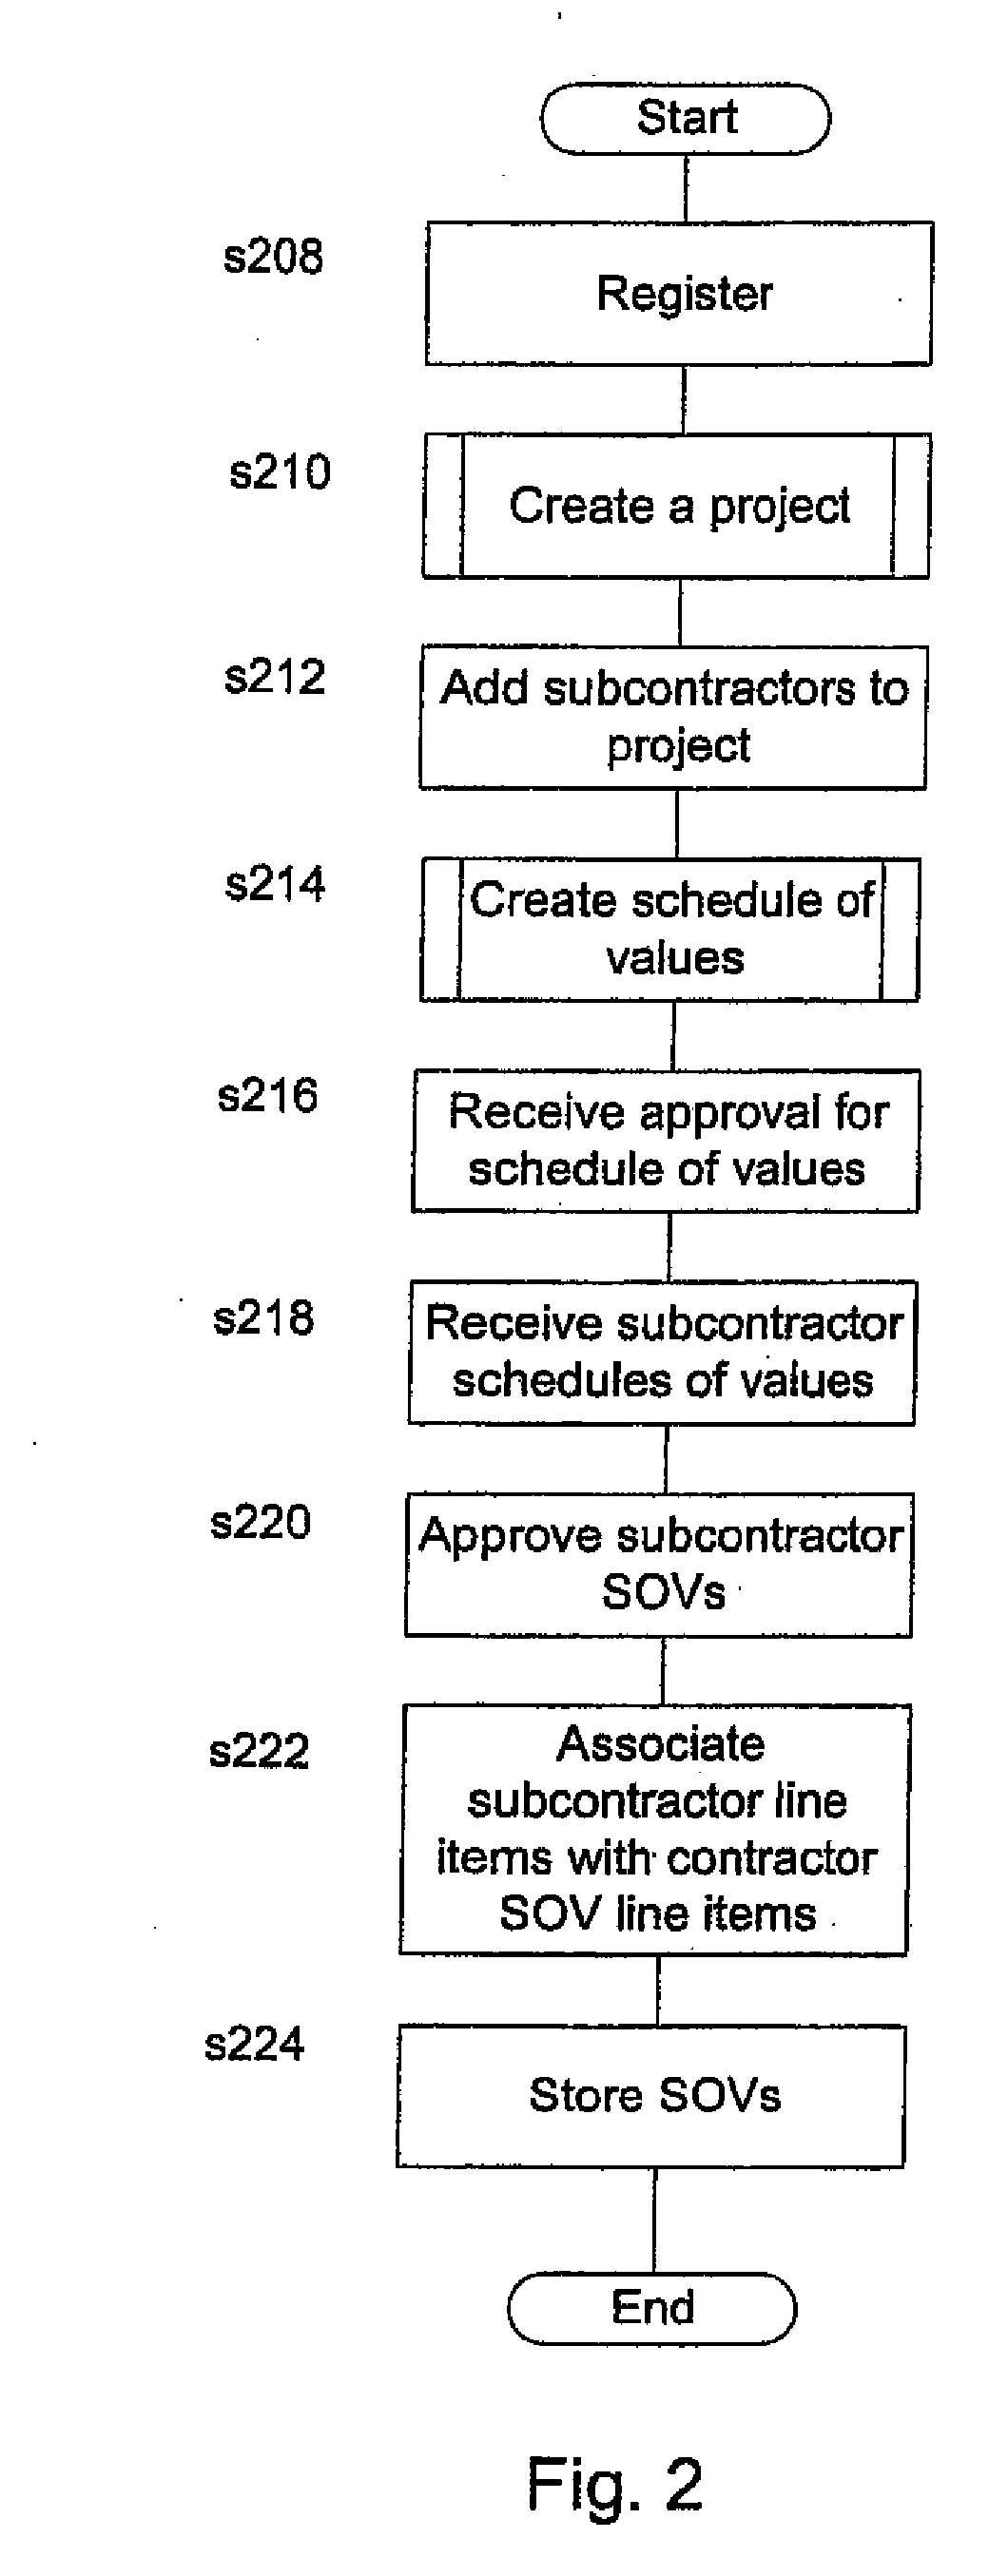 Administering contracts over data network